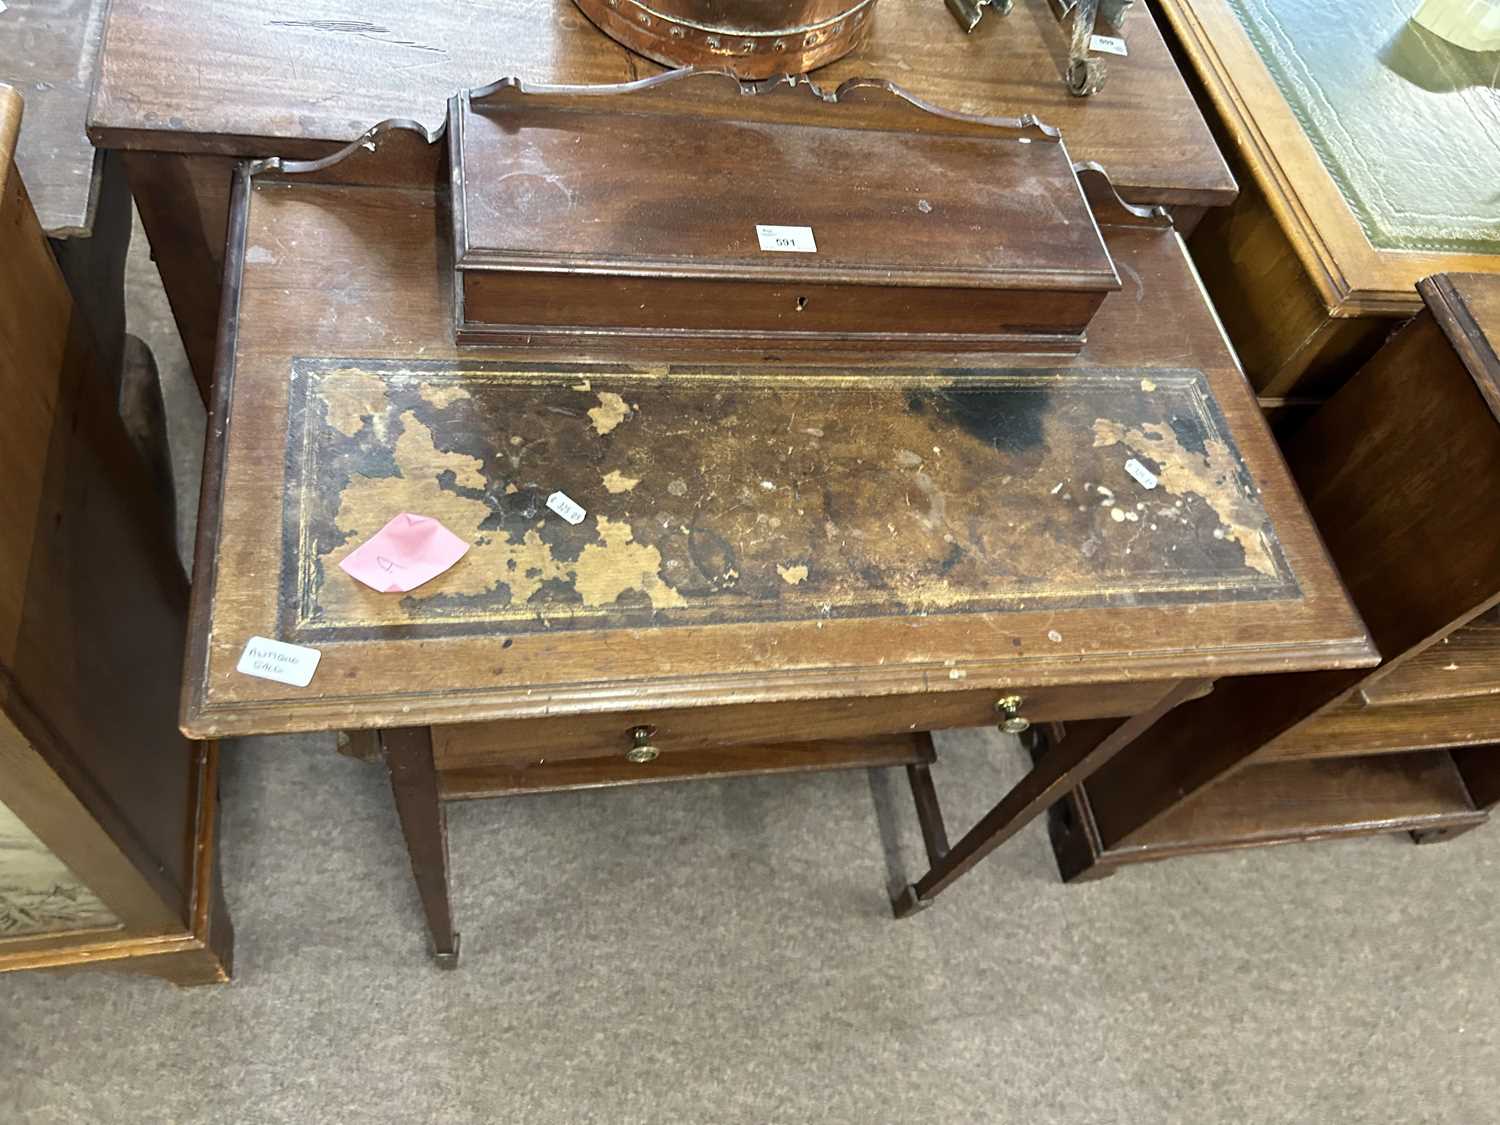 A small Edwardian writing table with a hinged storage compartment, worn leather writing surface - Image 2 of 2